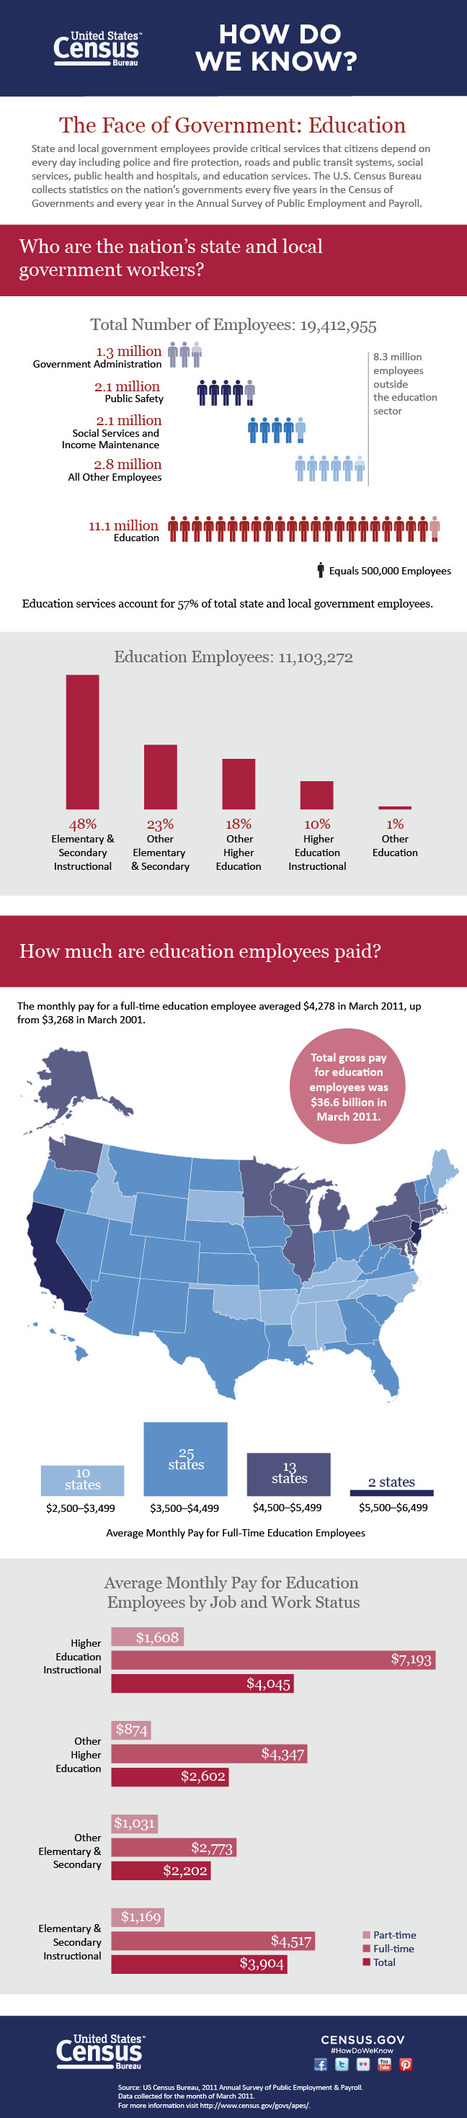 Teacher Salaries: Everything You Wanted To Know [Infographic] | 21st Century Learning and Teaching | Scoop.it